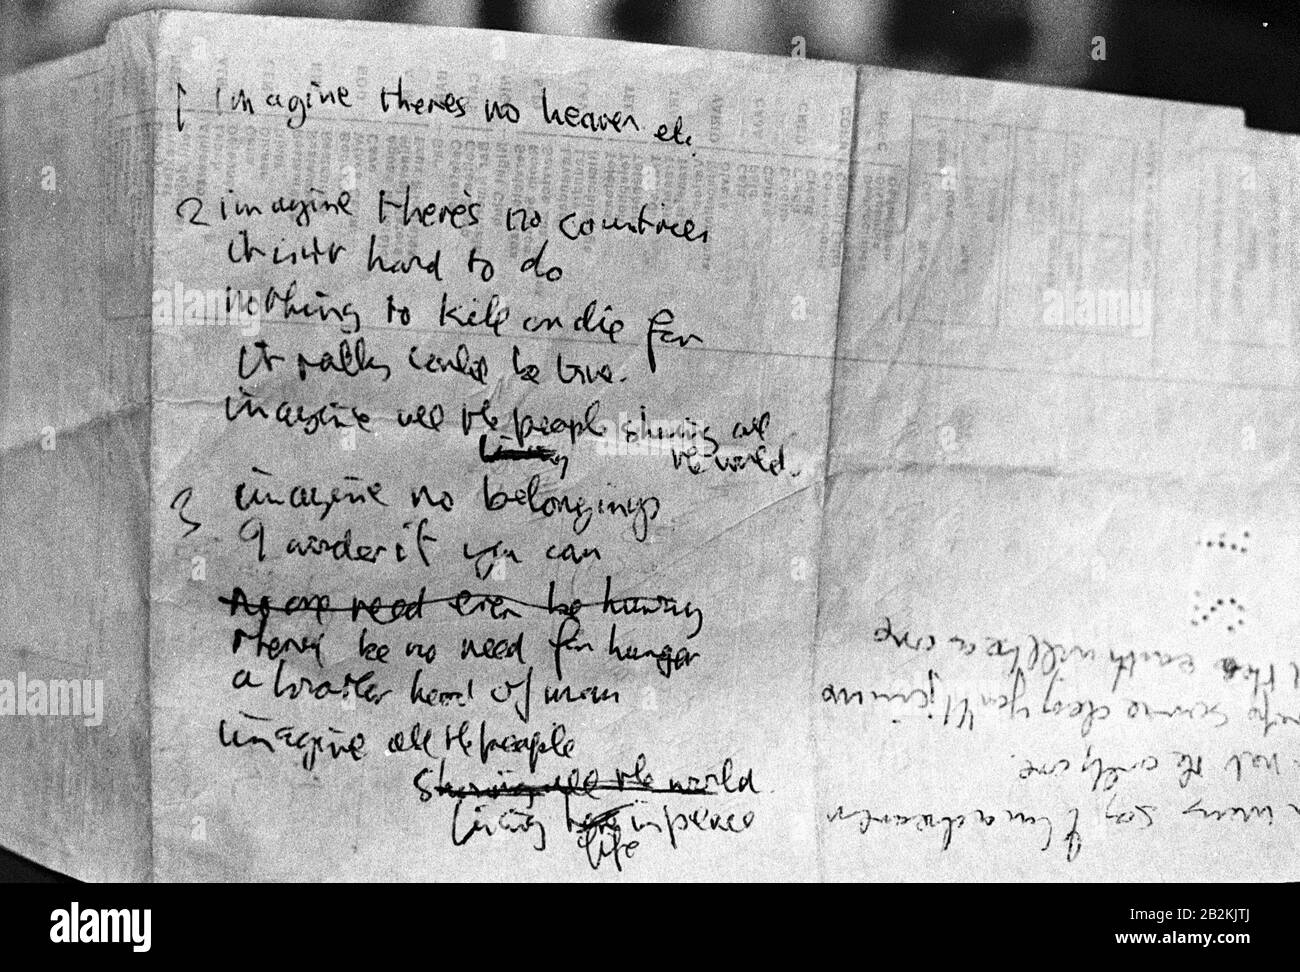 A Majorca hotel billed 20/04/1971 with, on the reverse, John Lennon's original handwritten lyrics of 'Imagine', which was included in a sale of rock and roll memorabilia 1956-1983 at Sotheby's salesroom in New Bond Street, London. It was expected to fetch between £5,000 and £10,000. Stock Photo